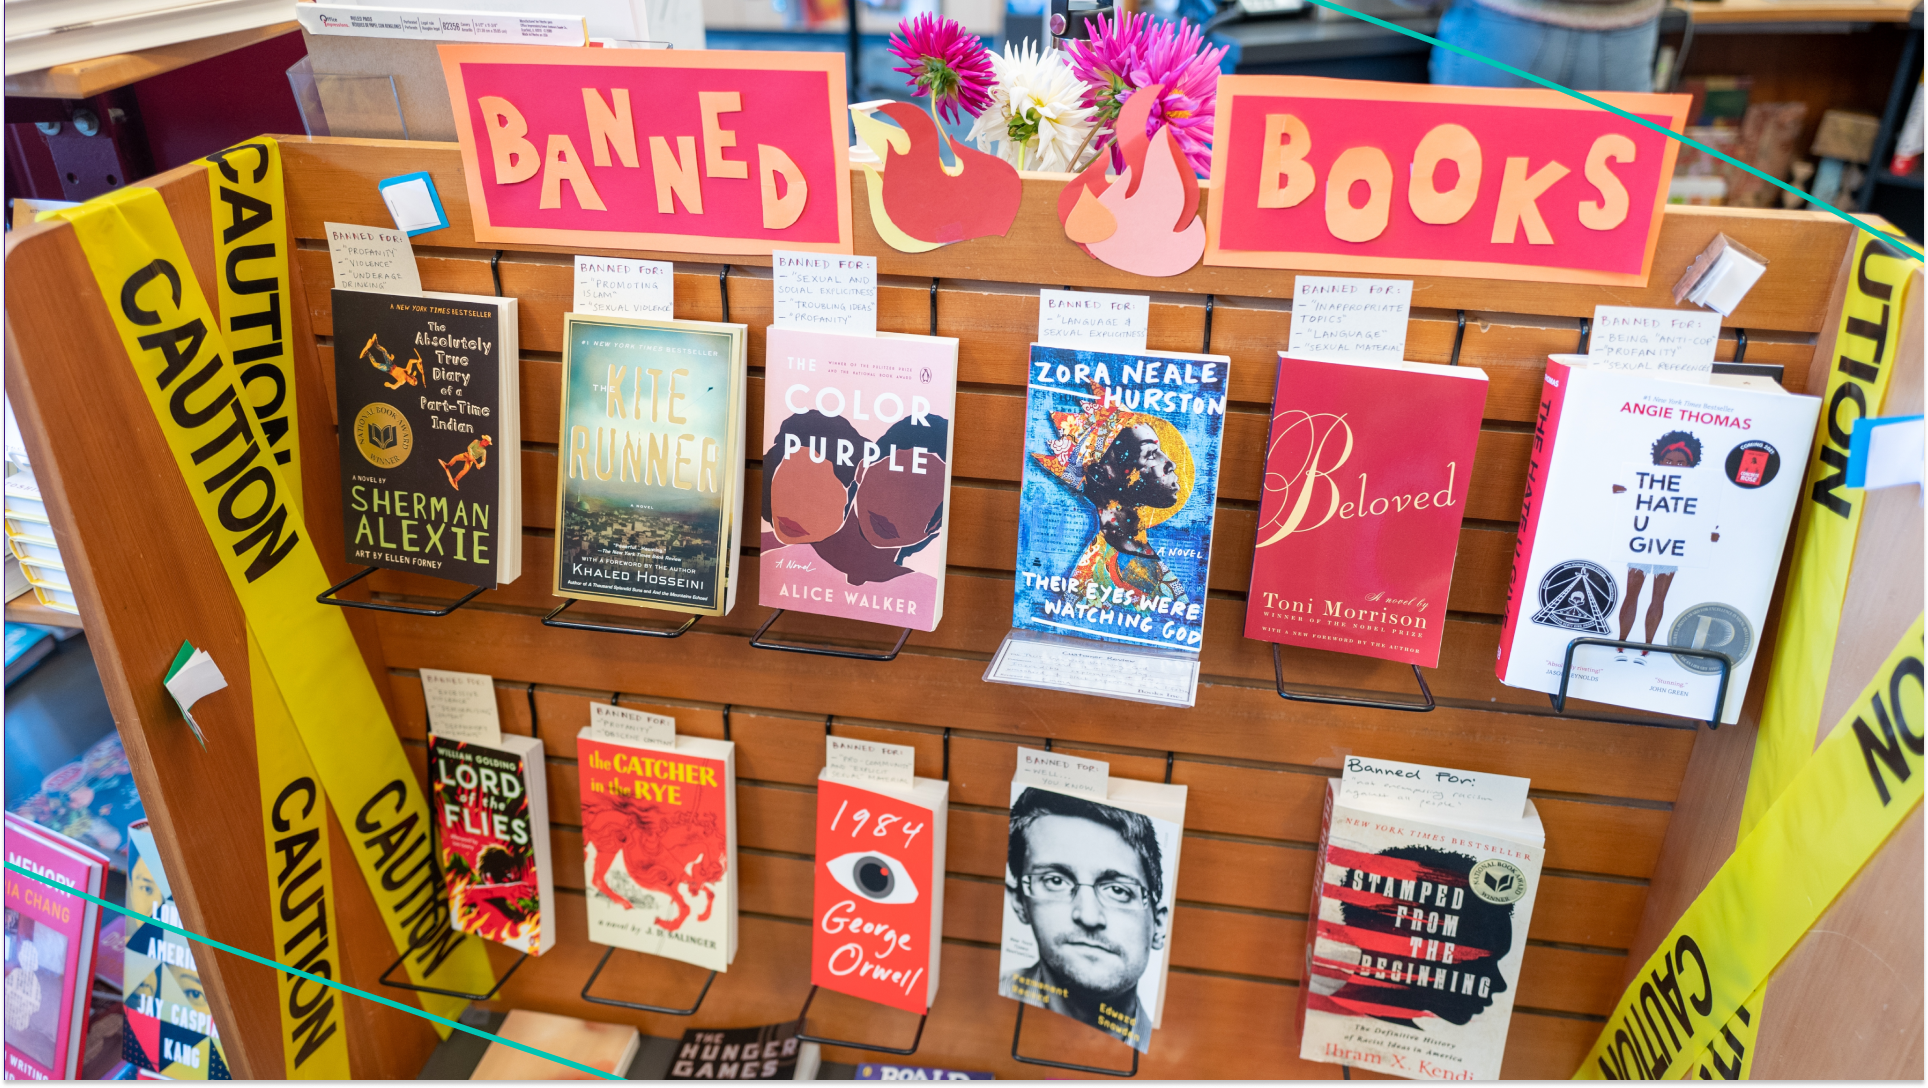 Display of banned books or censored books at Books Inc